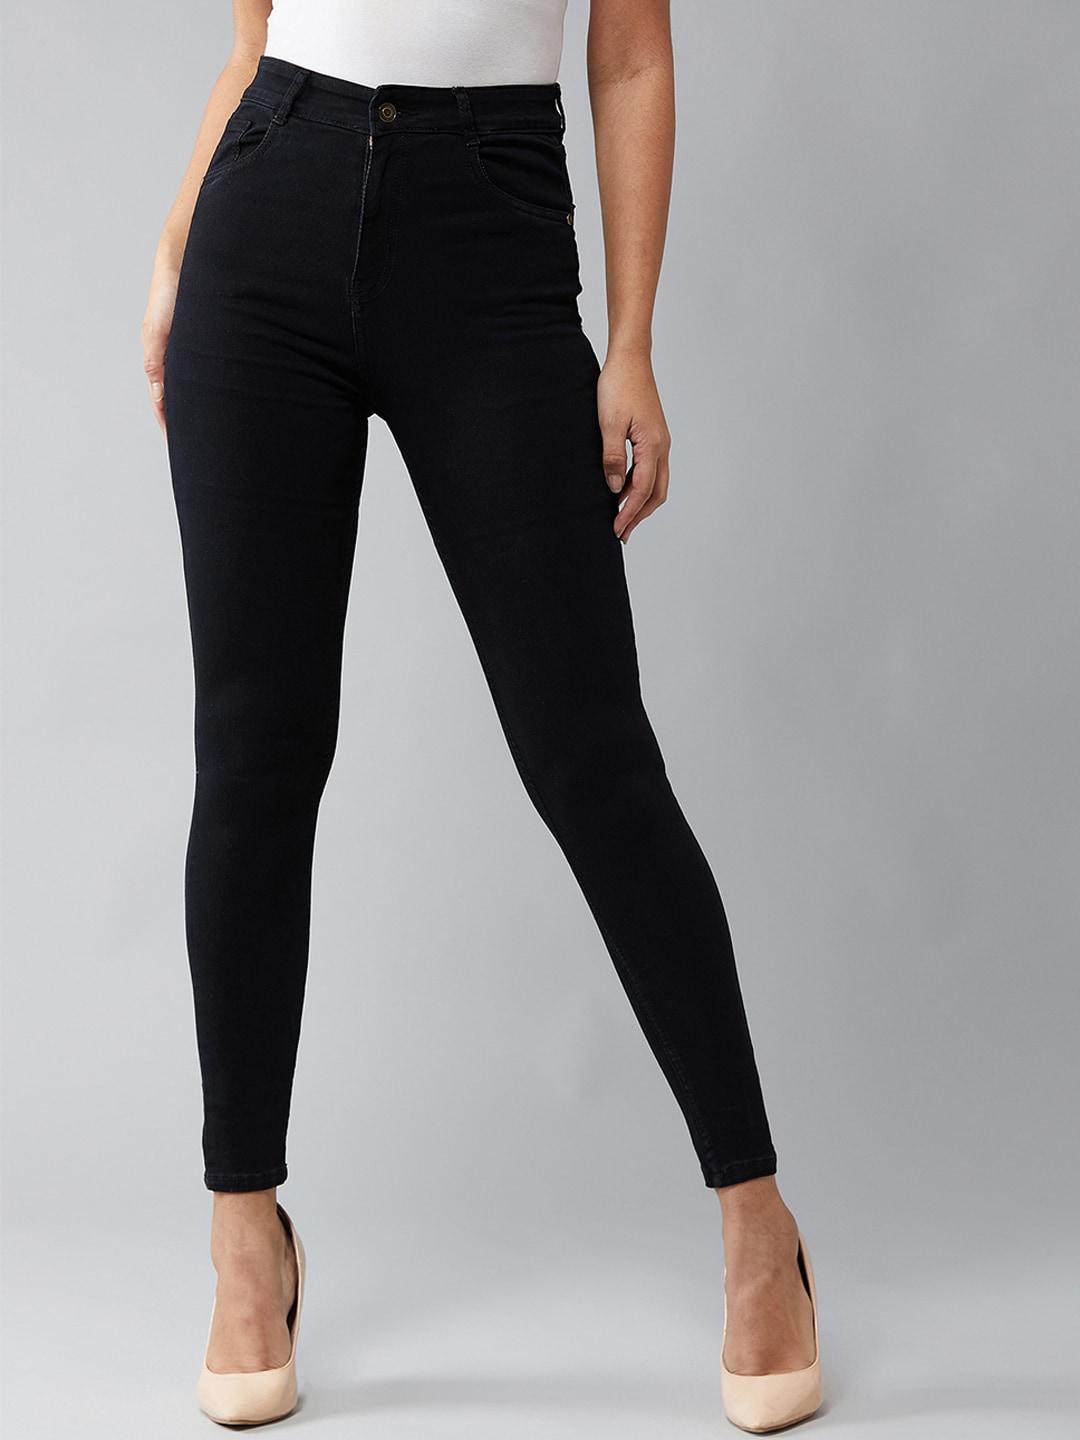 dolce-crudo-women-black-skinny-fit-high-rise-clean-look-stretchable-jeans